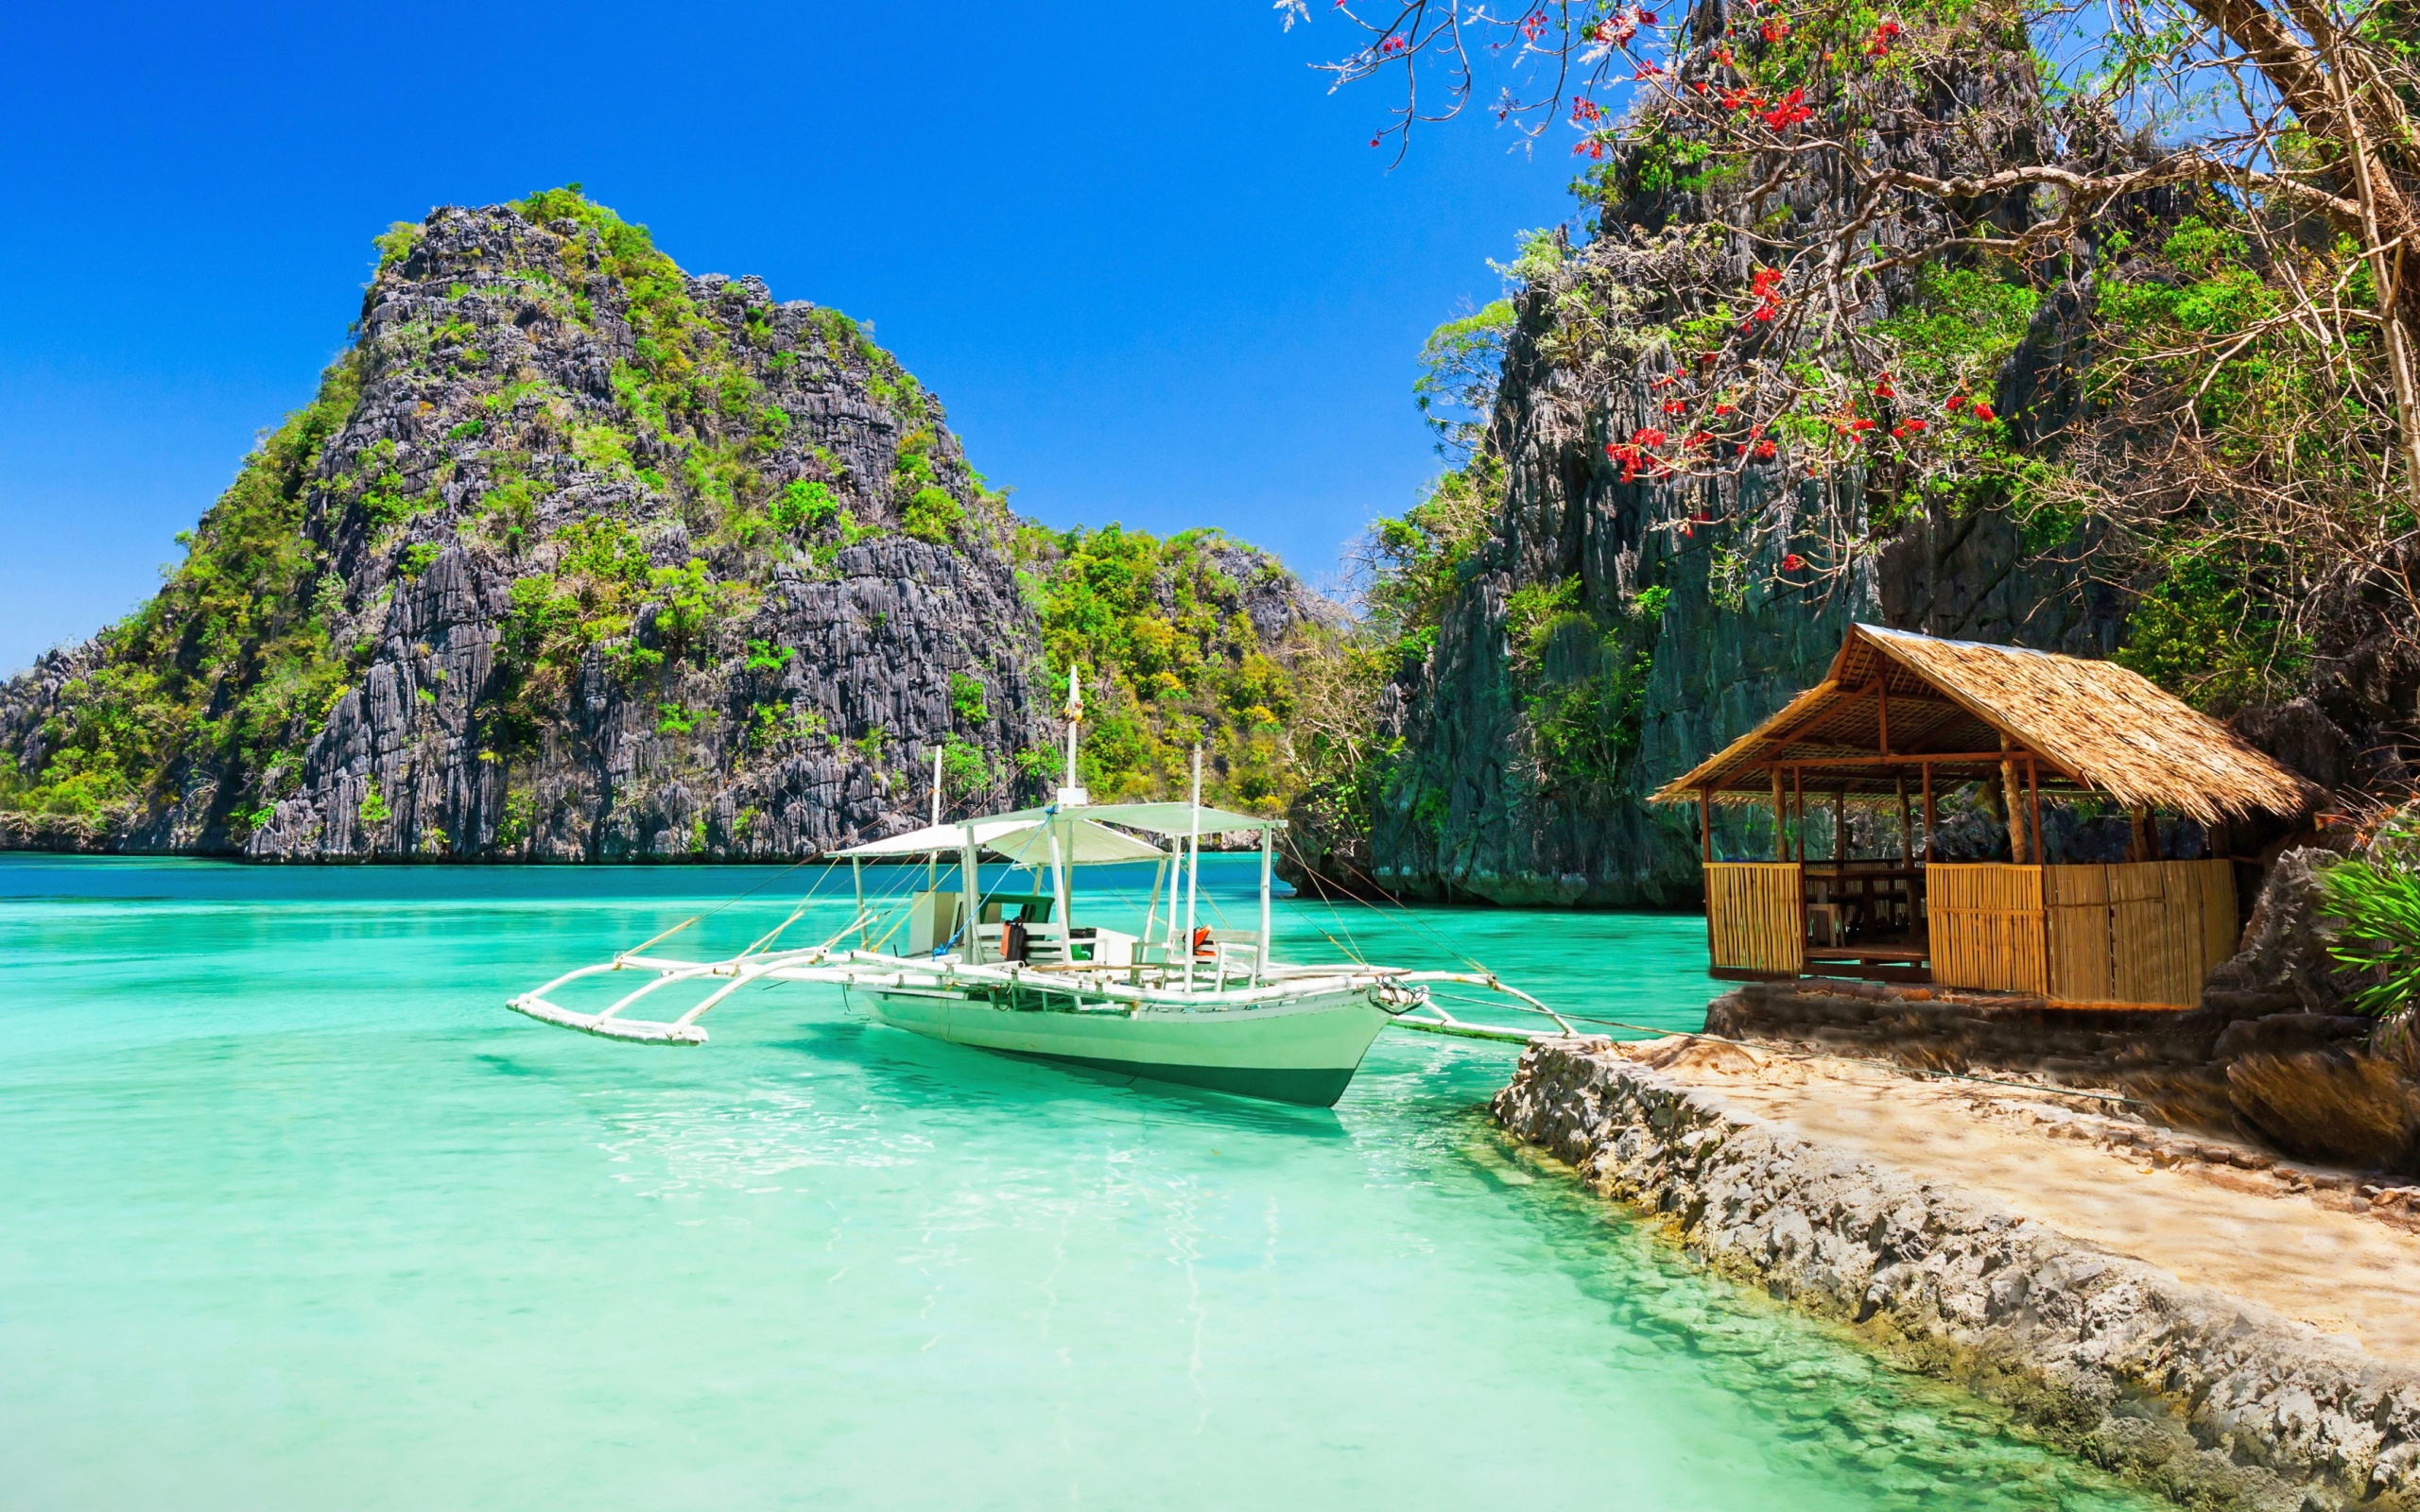 Philippines Wallpaper HD Here